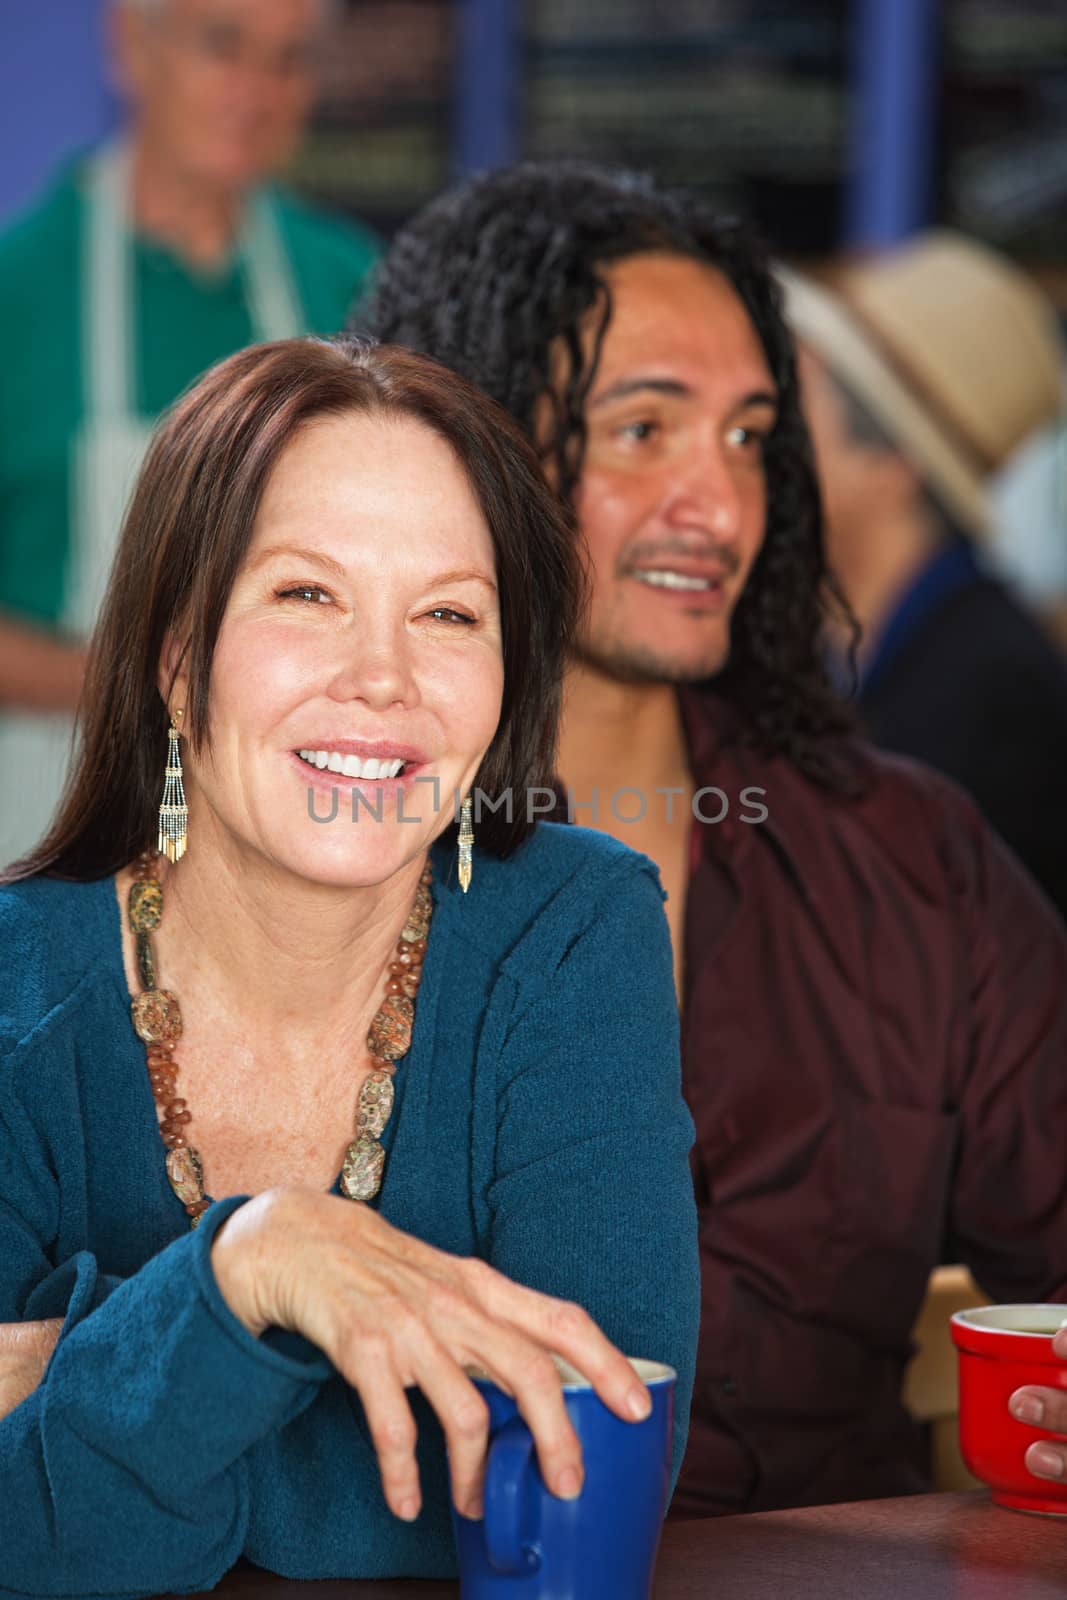 Smiling European woman with Latino man in cafe